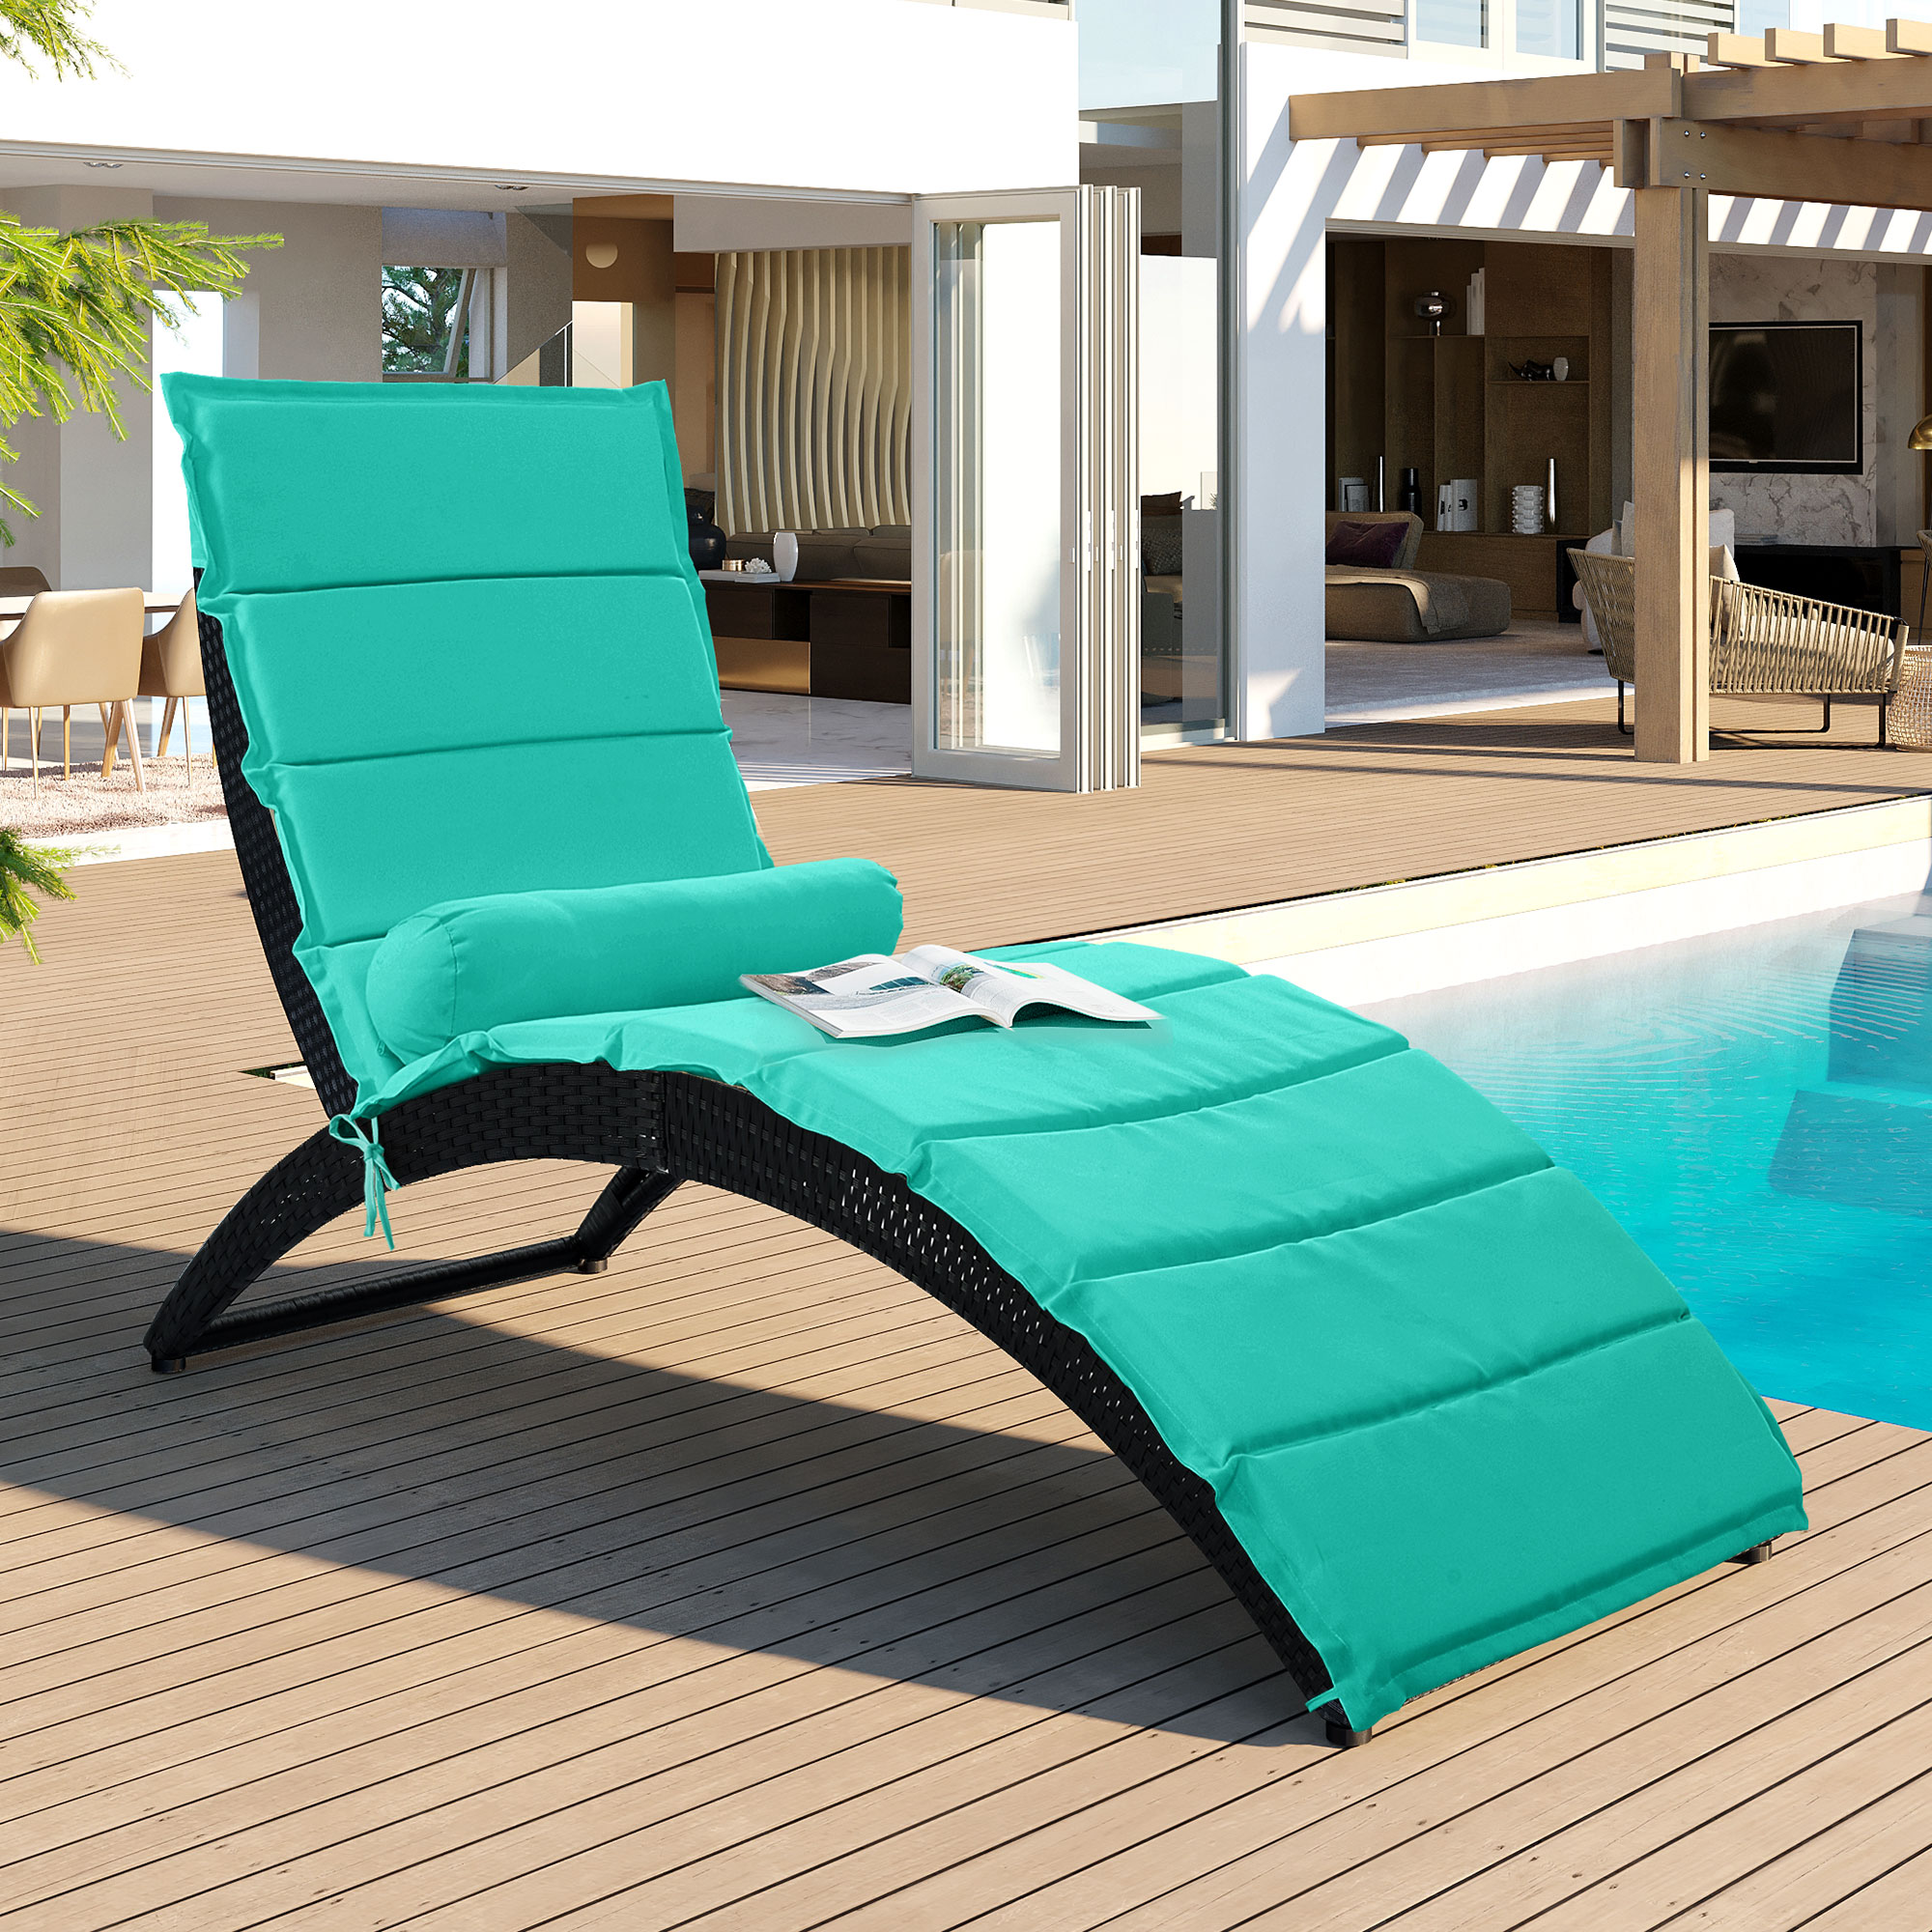 Patio Chaise Lounge, Reclining Camping Chair, PE Rattan Folding Sun Recliner Chair with Seat Cushion, Poolside Garden Outdoor Chaise Lounge Chairs, JA1096 - image 1 of 8